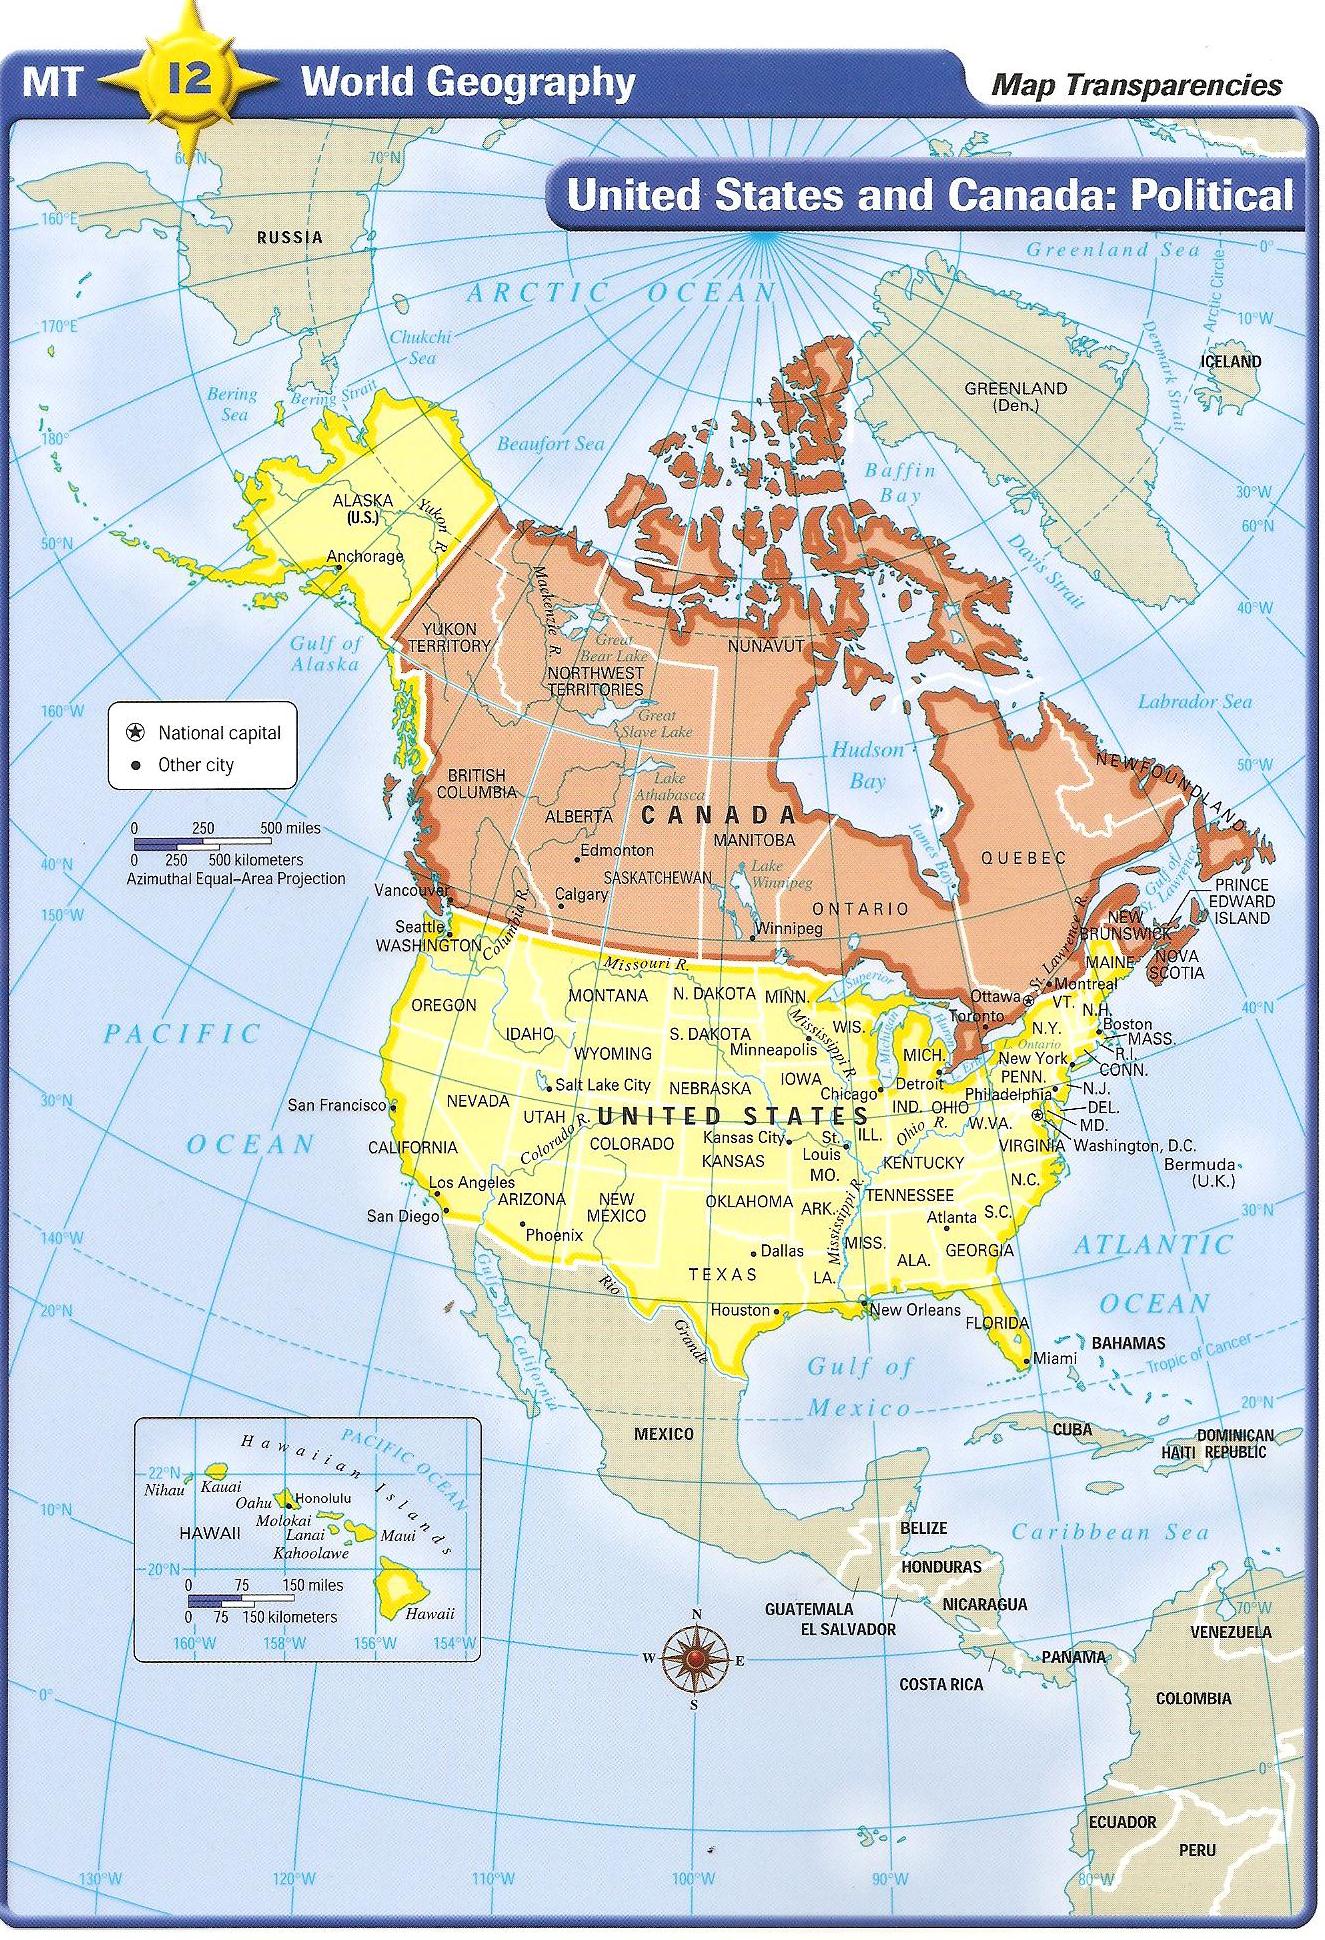 United States and Canada Map Labeling - Mr. Foote Hiram Johnson High School